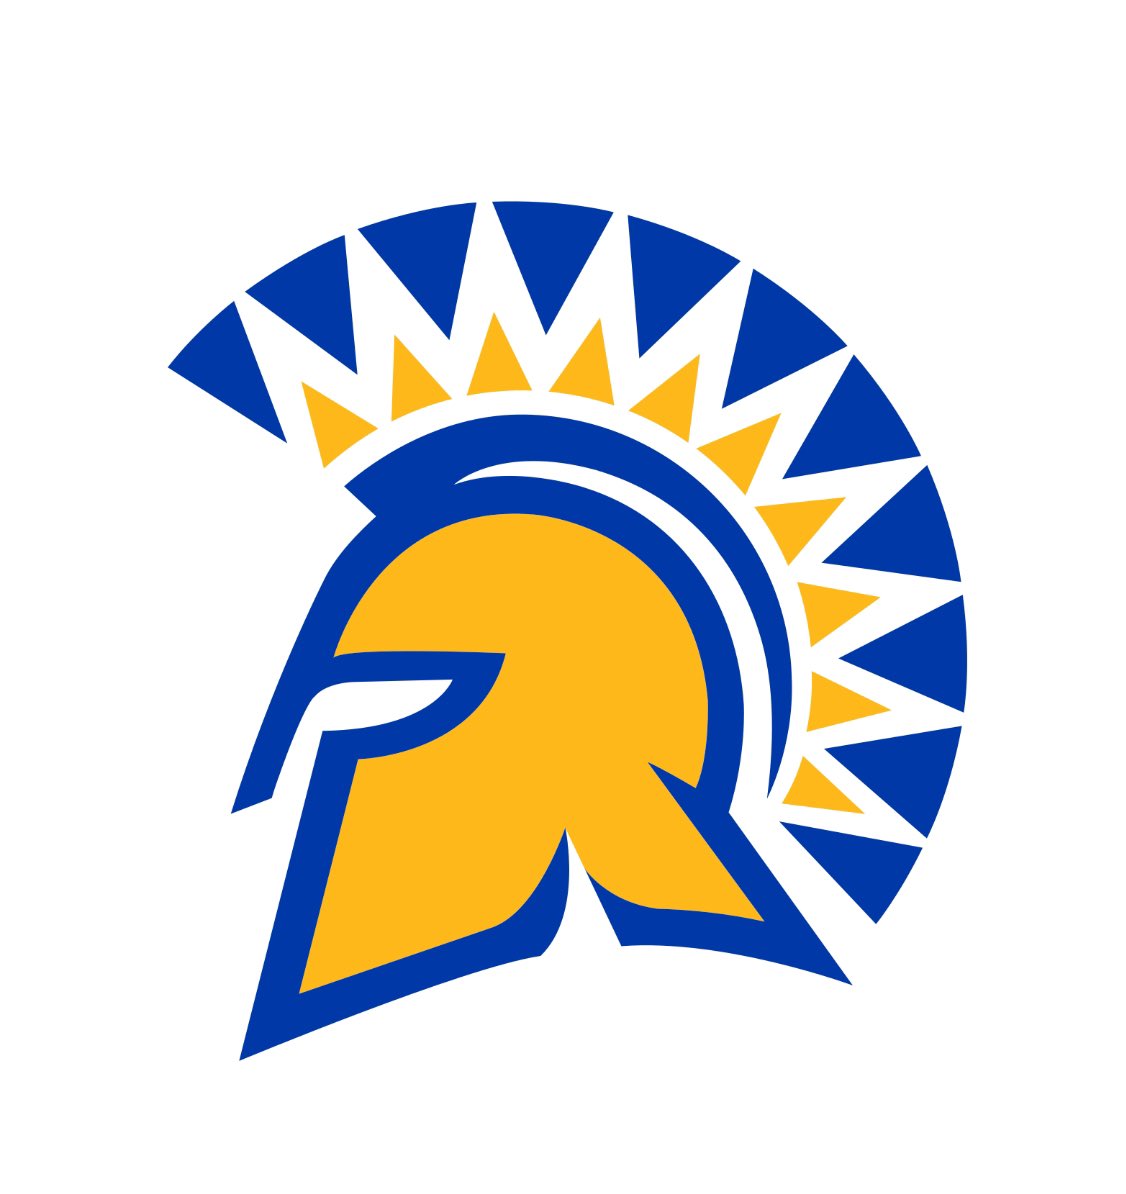 After having a great conversation with Coach Al, I am extremely blessed and humbled to say that I have received my 1st official D1 offer from San Jose State University. Go Spartans 🔵🟡!! @CoachLapuaho @SanJoseStateFB @aaroncrone11 @ERHSMustangFB @AthleticsERHS @Gutcheck